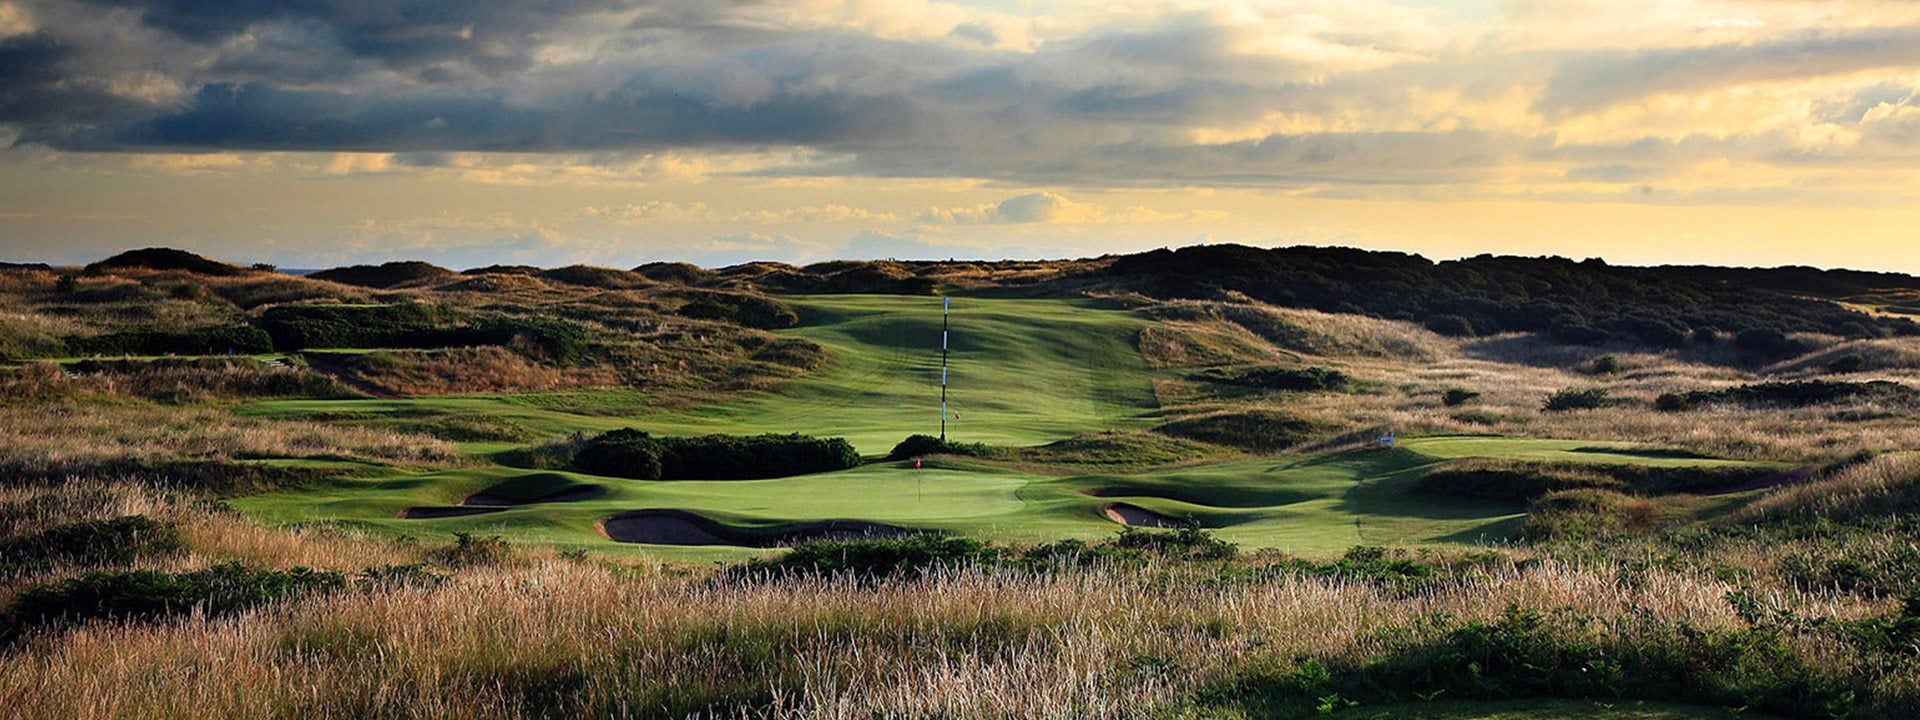 Panoramic view of the Royal Portrush Dunluce Golf Course, Portrush, County Antrim, Northern Ireland